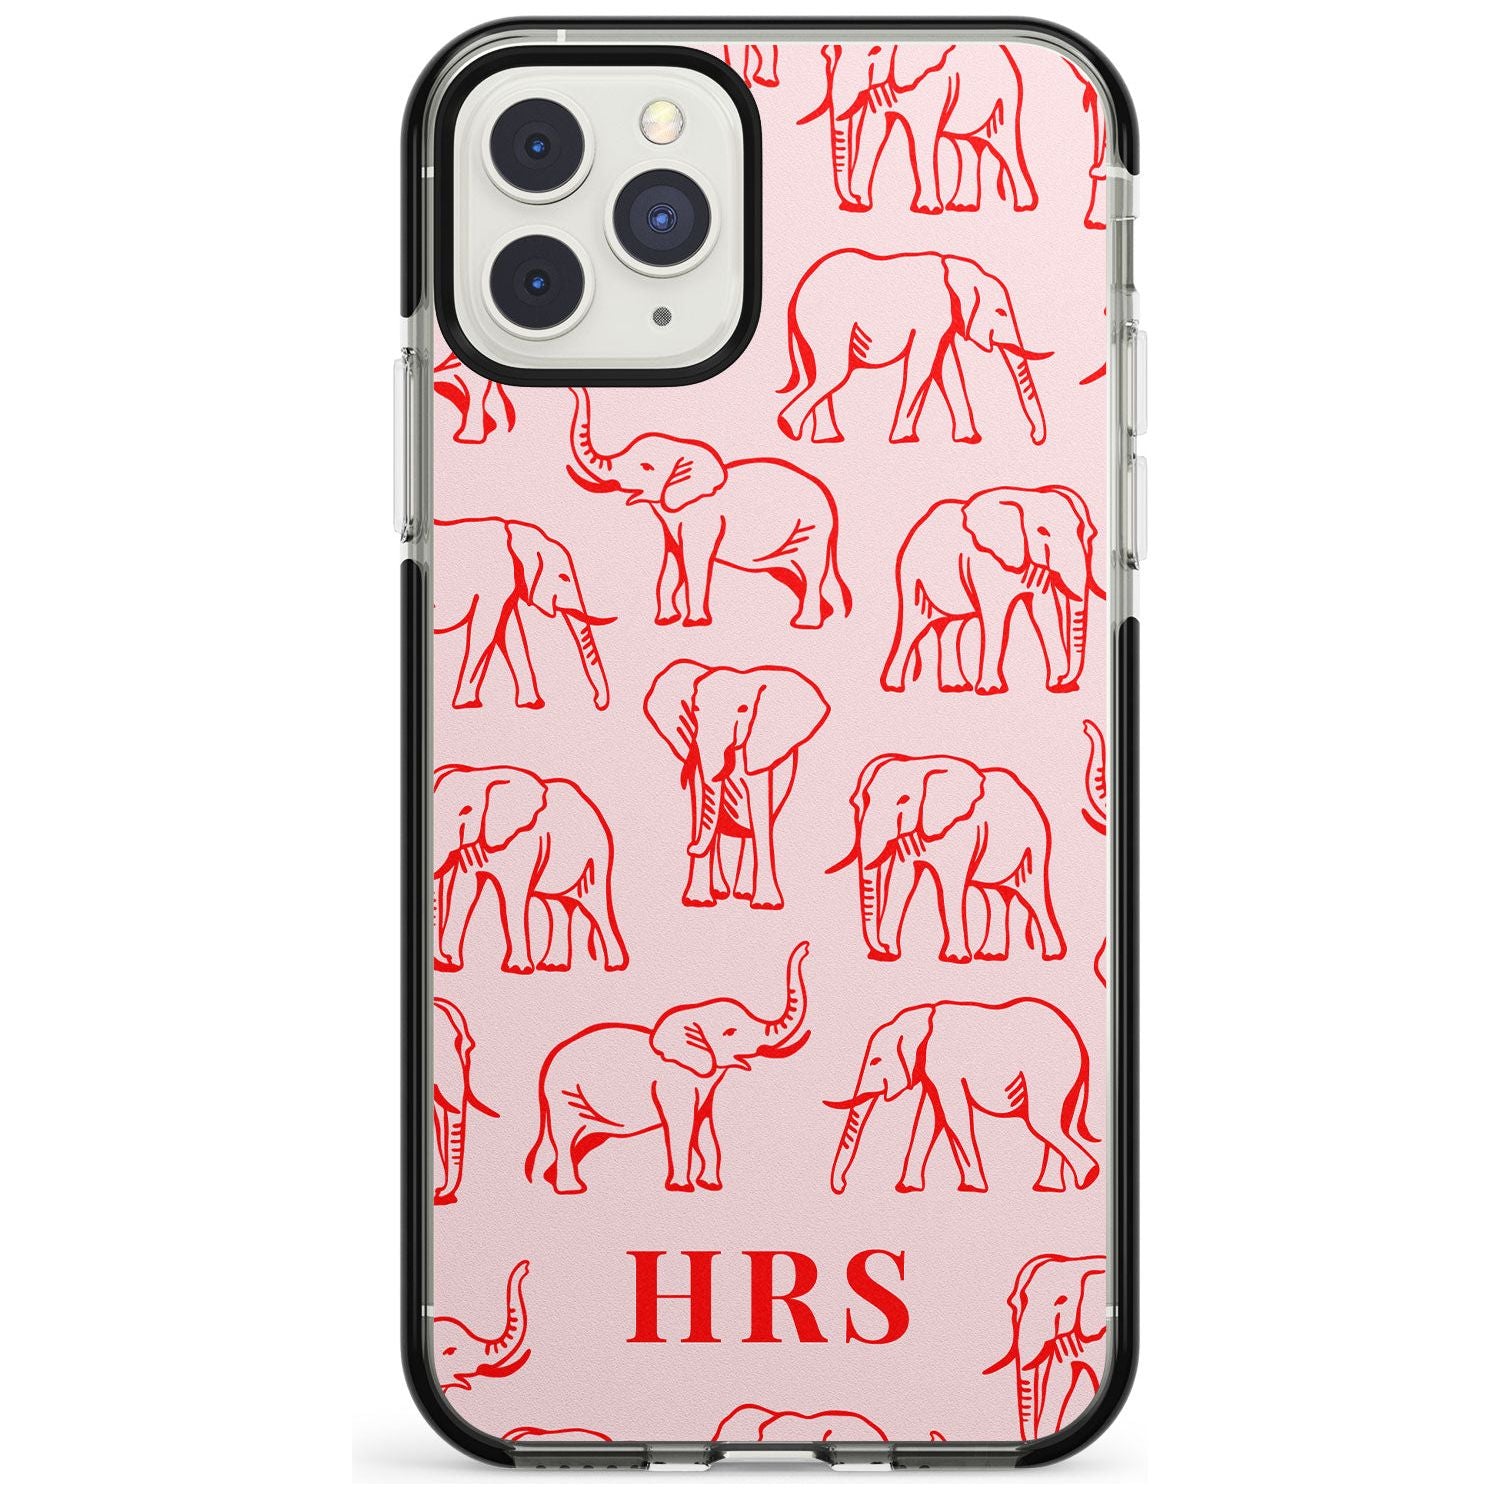 Personalised Red Elephant Outlines on Pink Black Impact Phone Case for iPhone 11 Pro Max